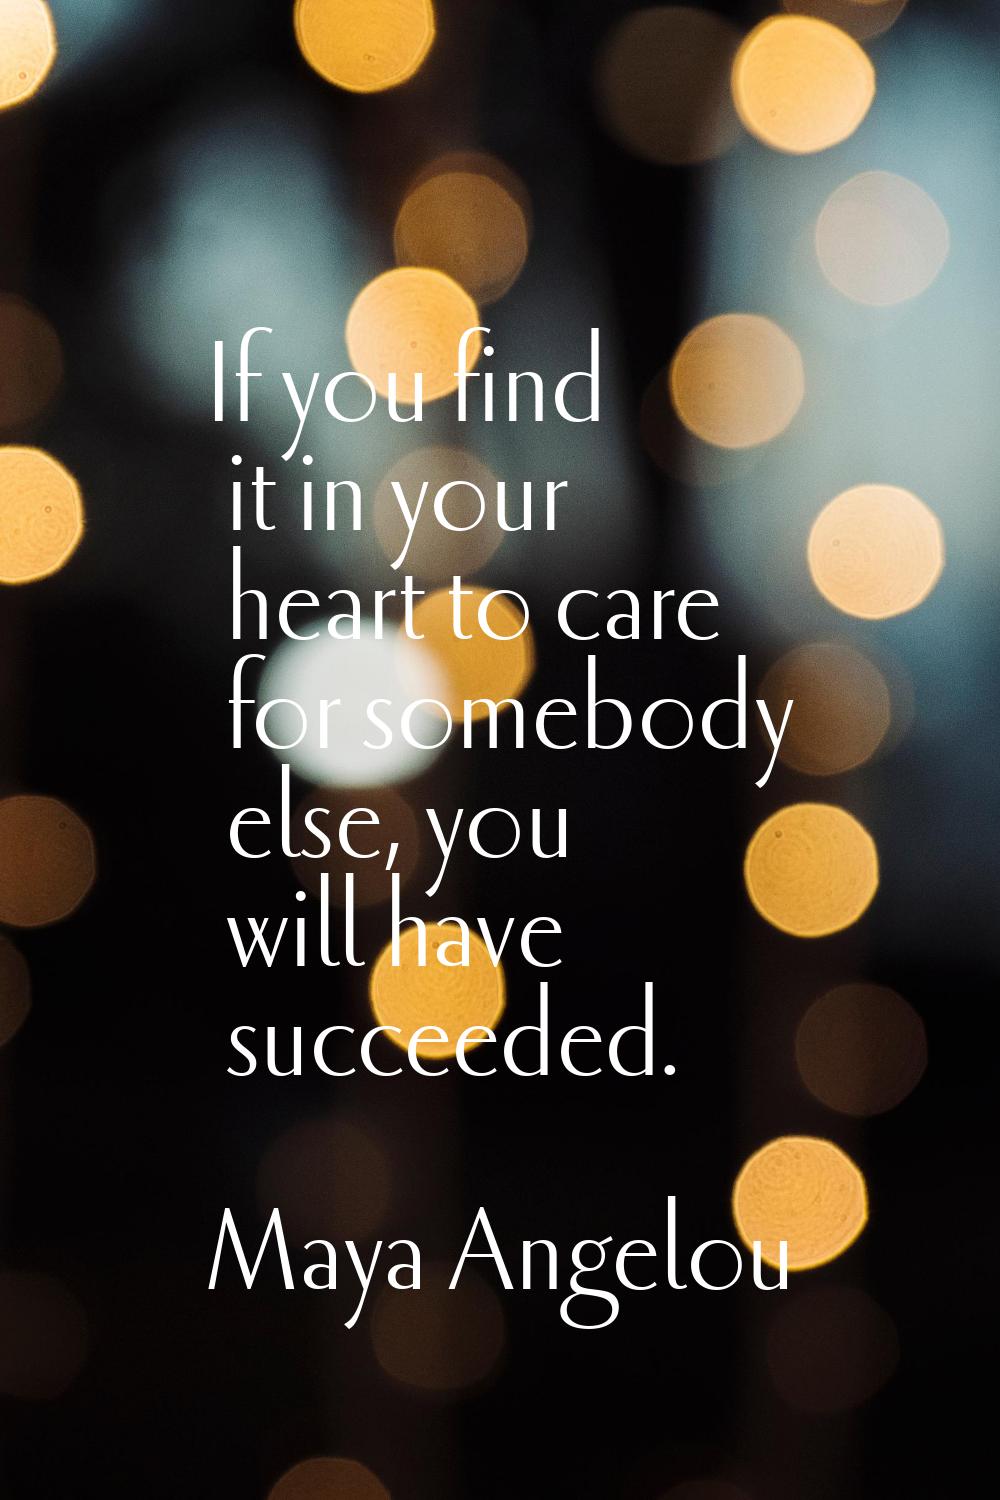 If you find it in your heart to care for somebody else, you will have succeeded.